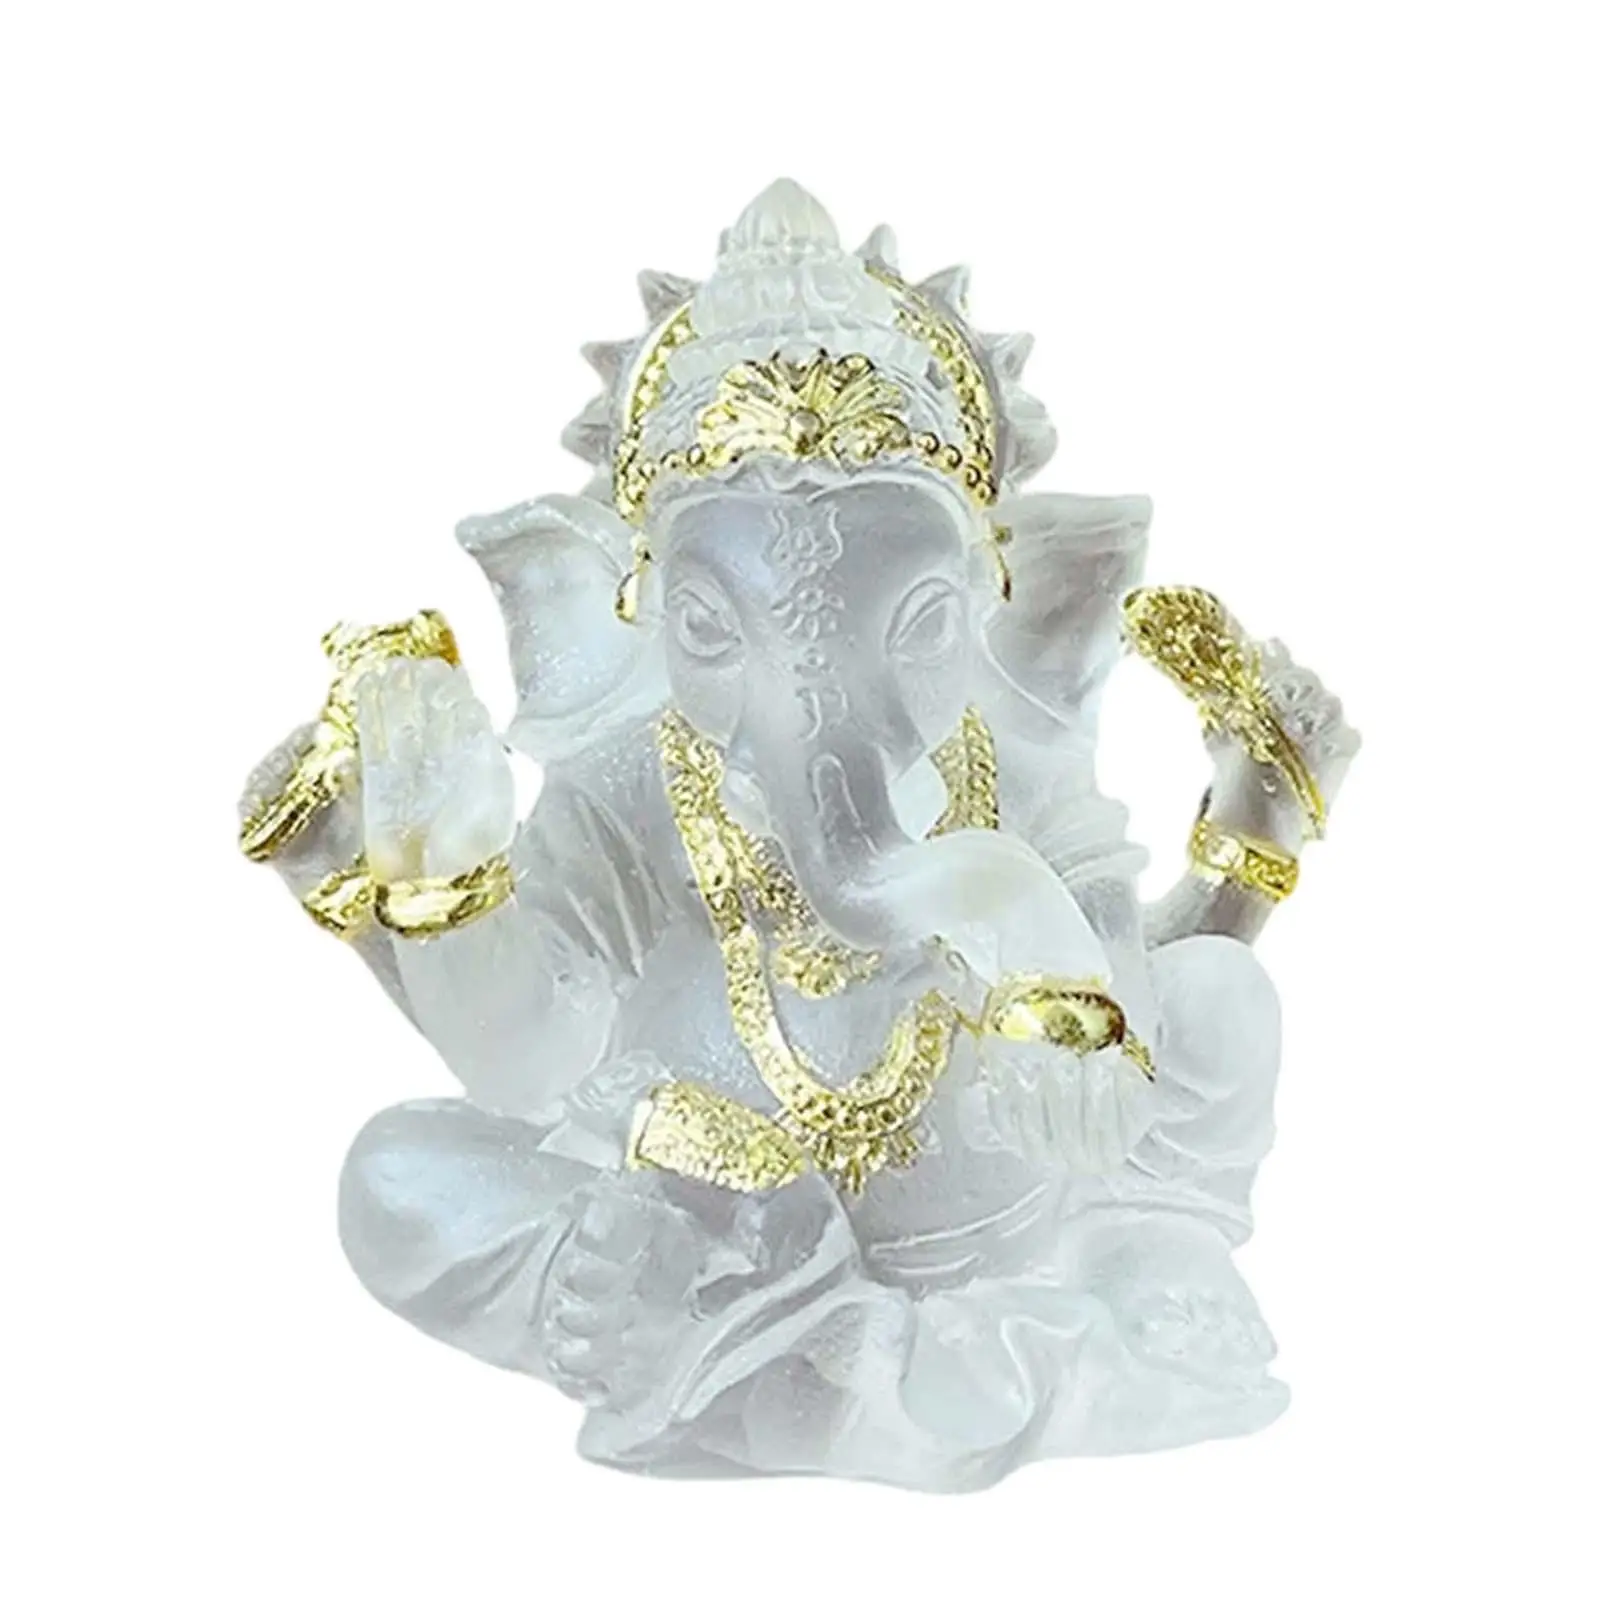 Translucent Elephant Ganesha Buddha Statue Lifelike Vivid Height 8cm Collection Craft for Home Office Tabletop Easily Clean